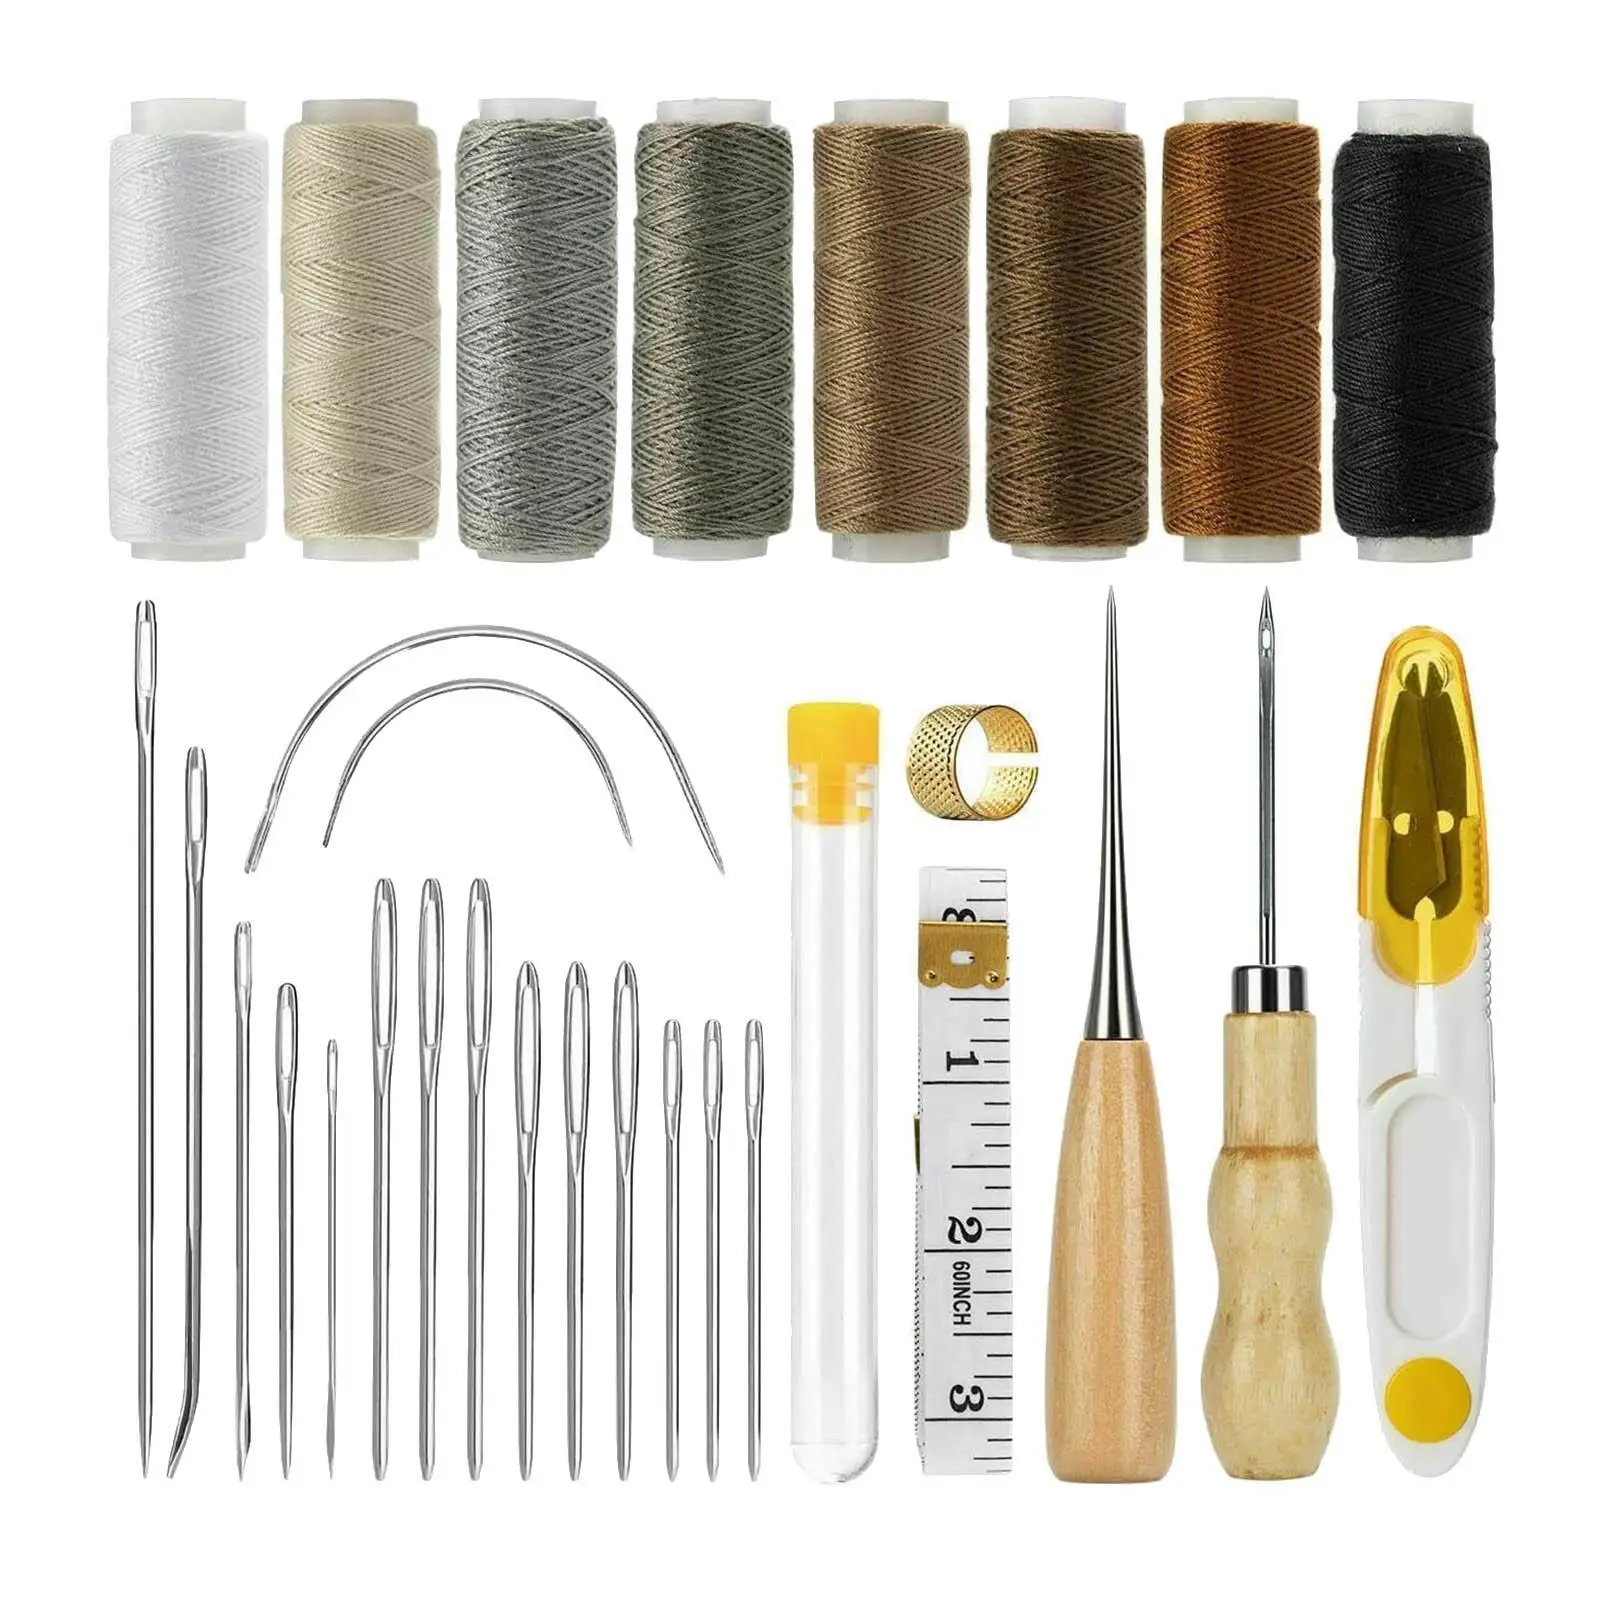 Multifunction 29Pieces Stitching Hand Sewing Leather Upholstery Repair Leather